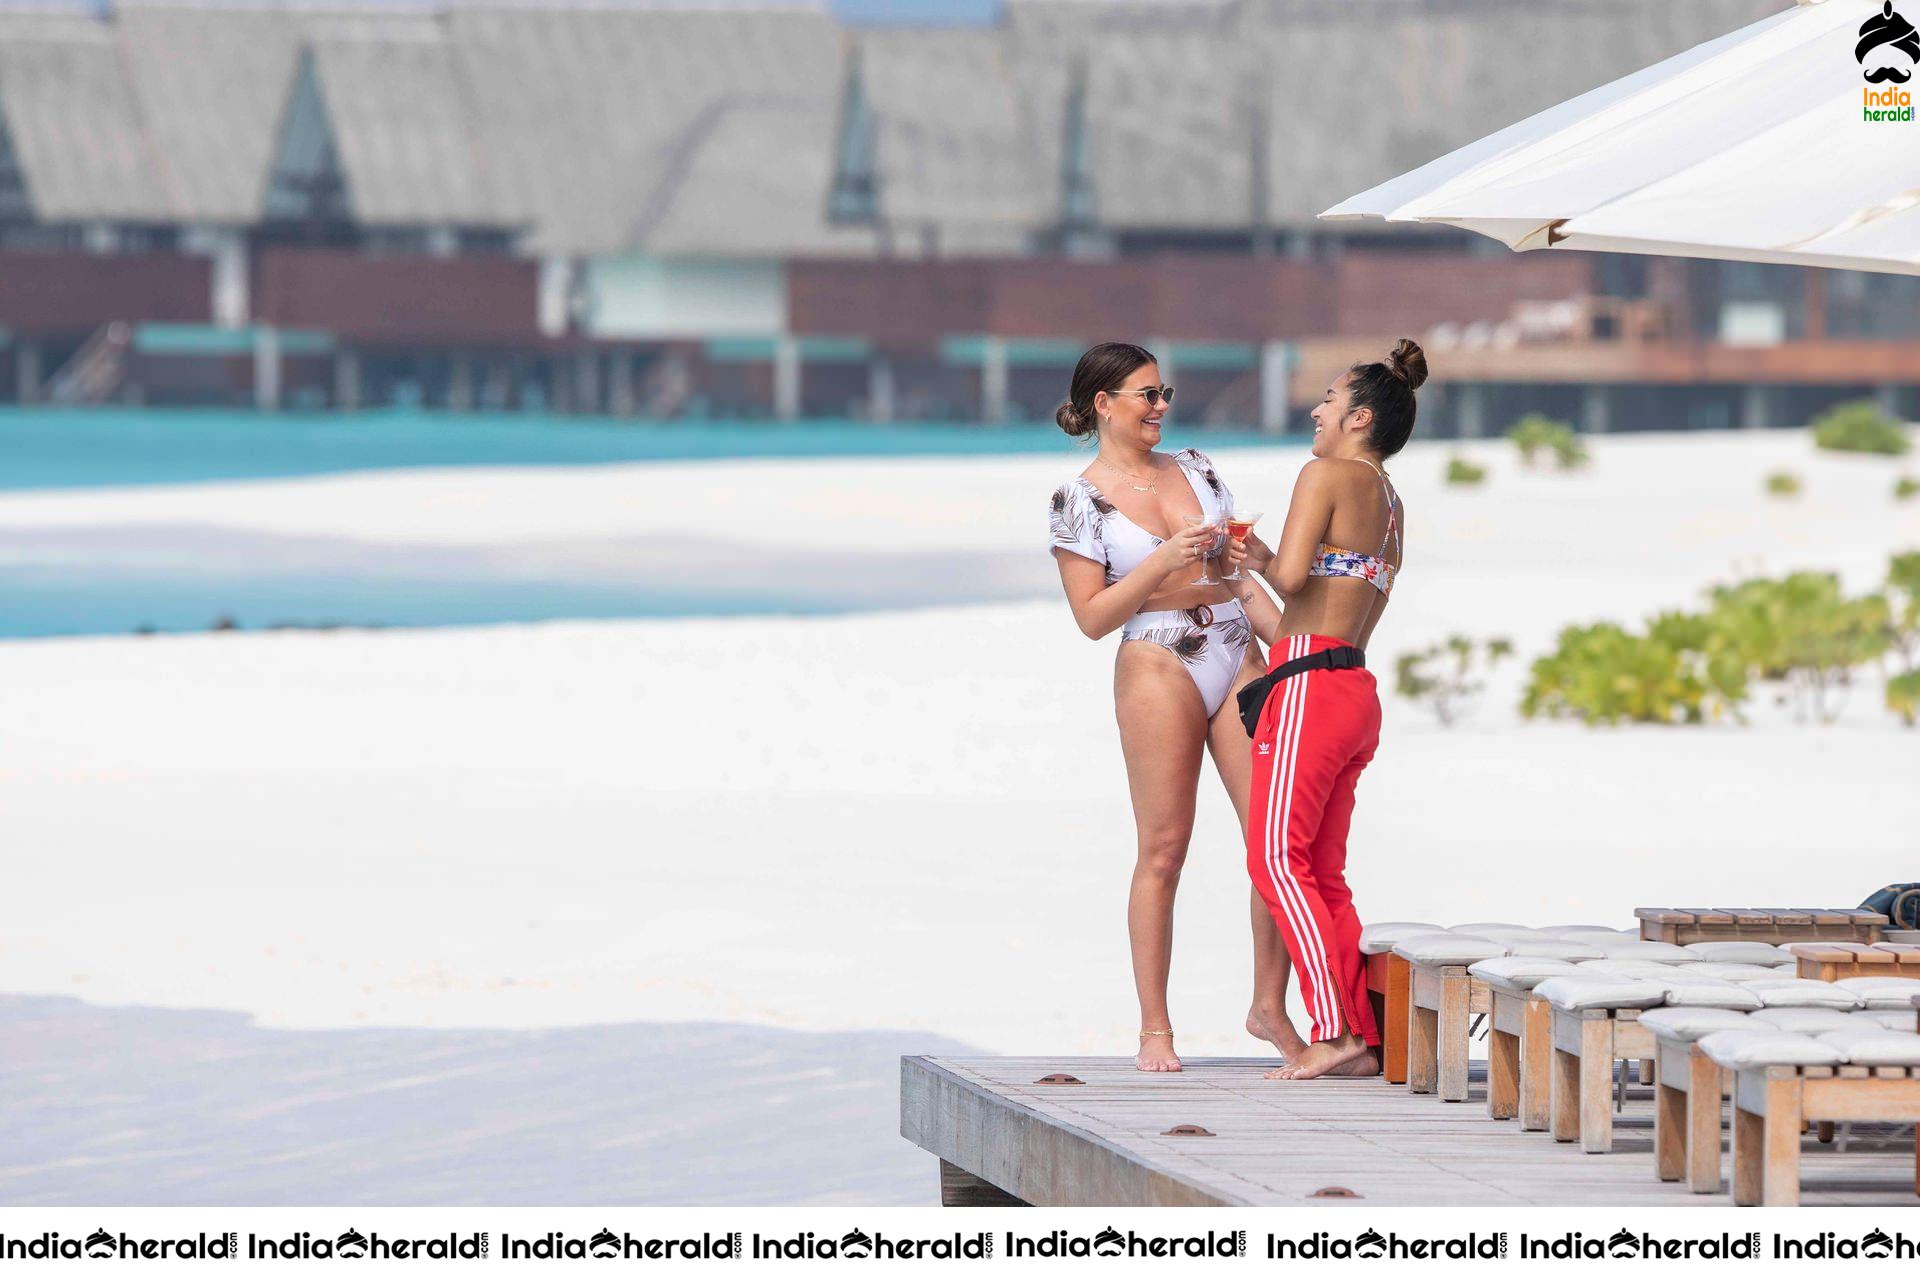 Megan Barton Hanson and Chelcee Grimes in the Maldives at the Heritance Aarah resort